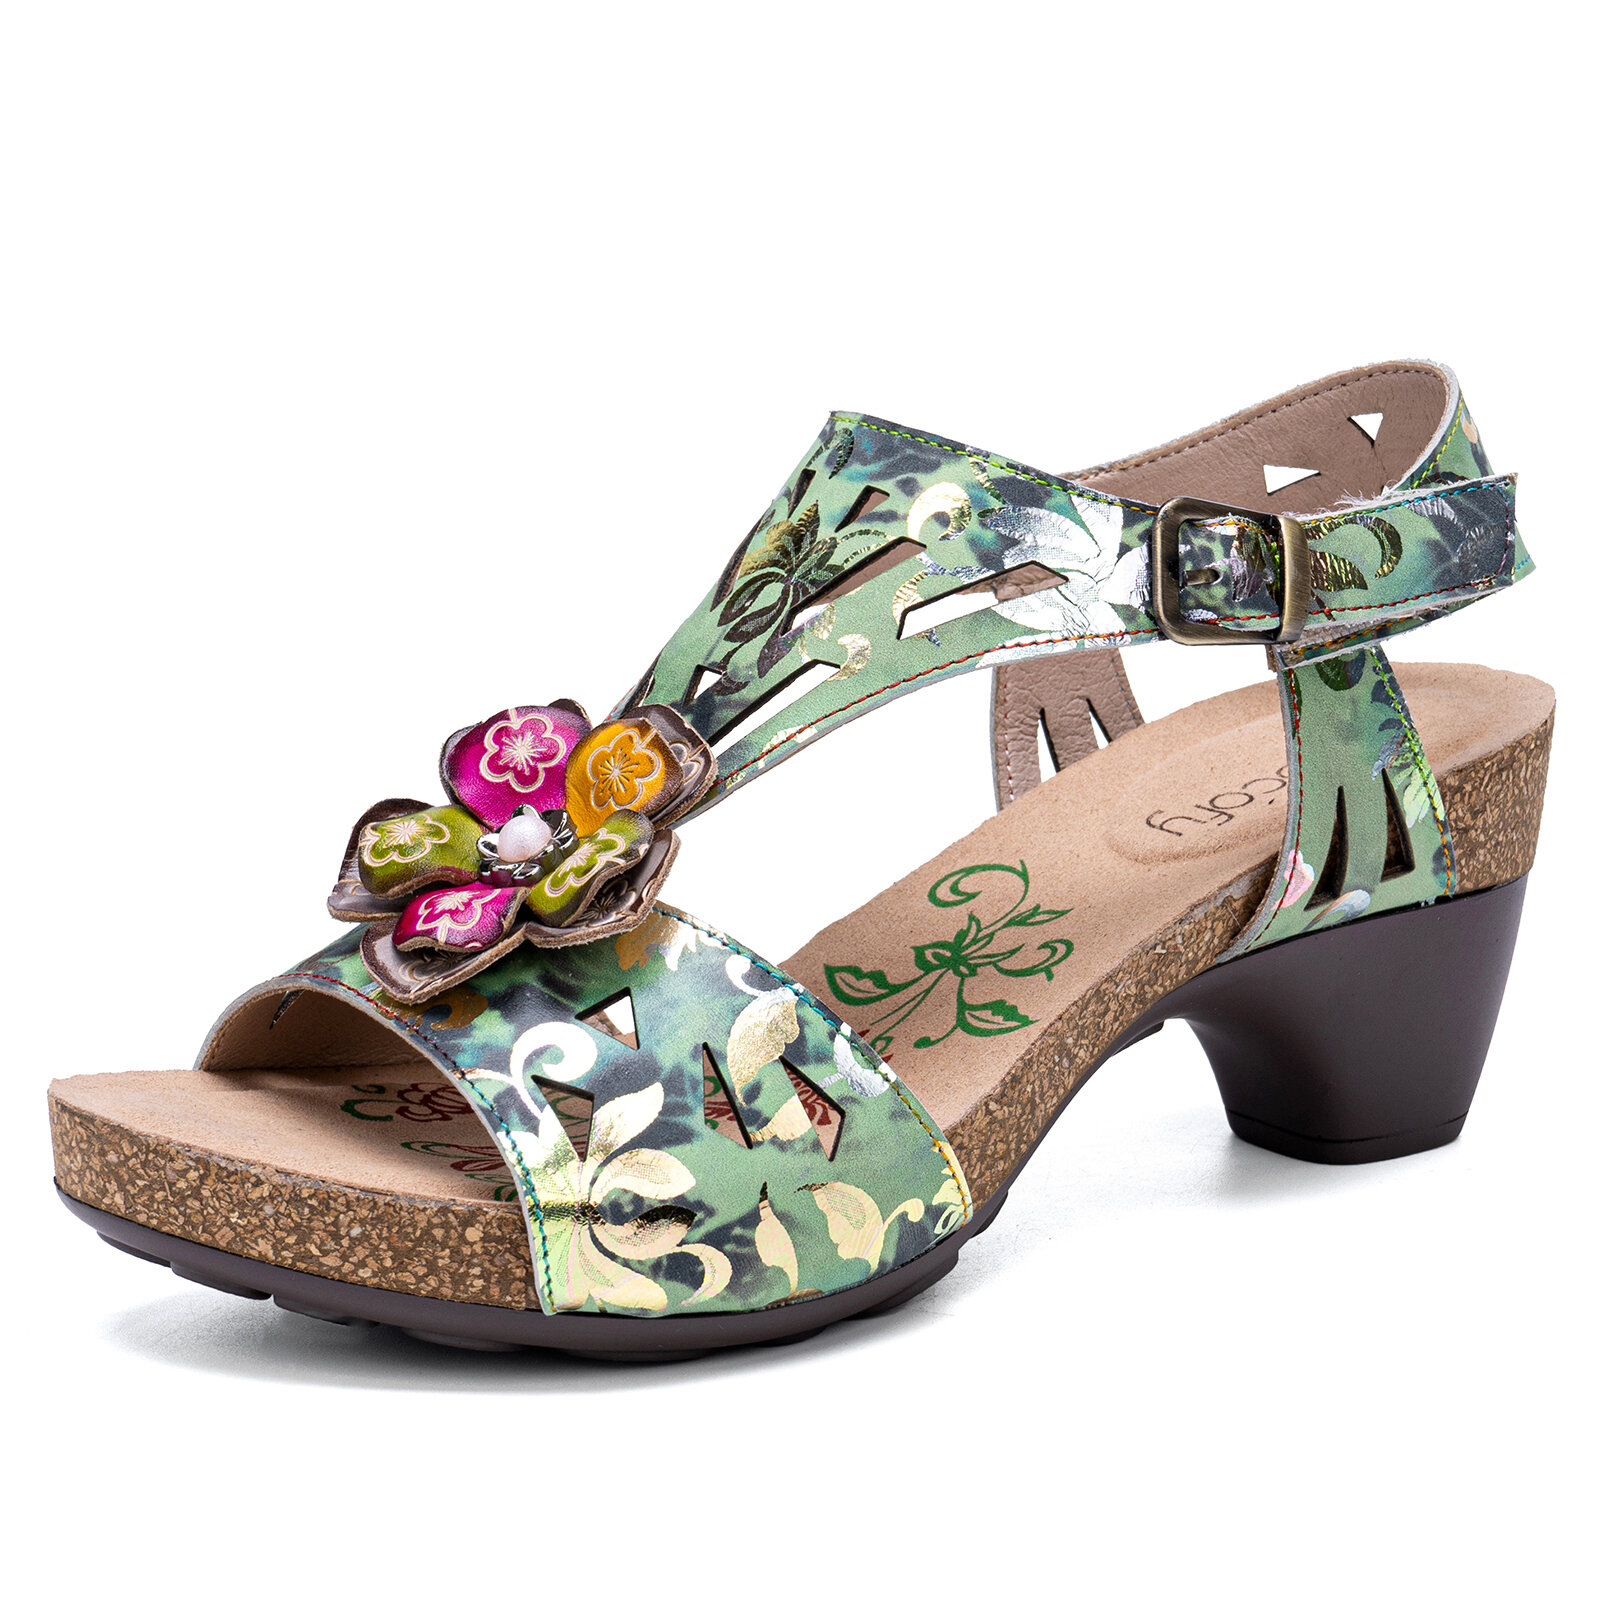 Socofy Genuine Leather Casual Bohemian Sequins T-Strap Heeled Sandals